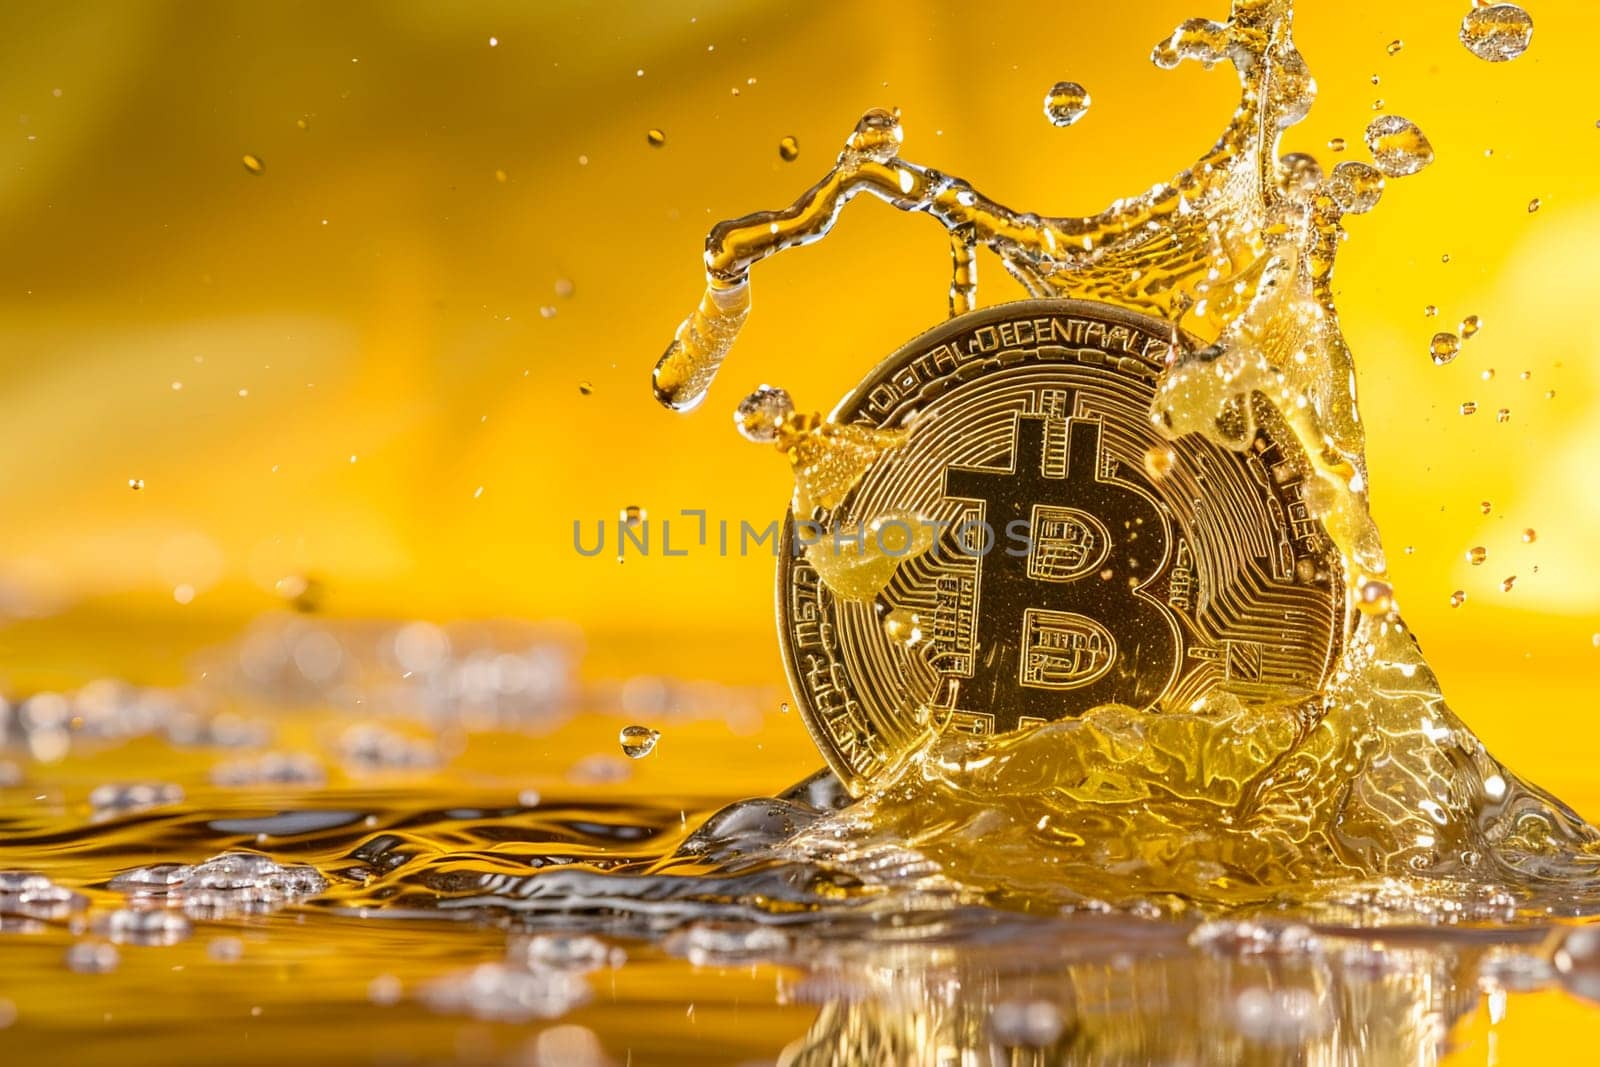 A Bitcoin crashes dynamically into a surface of liquid gold, representing cryptocurrency market volatility and investment concepts.